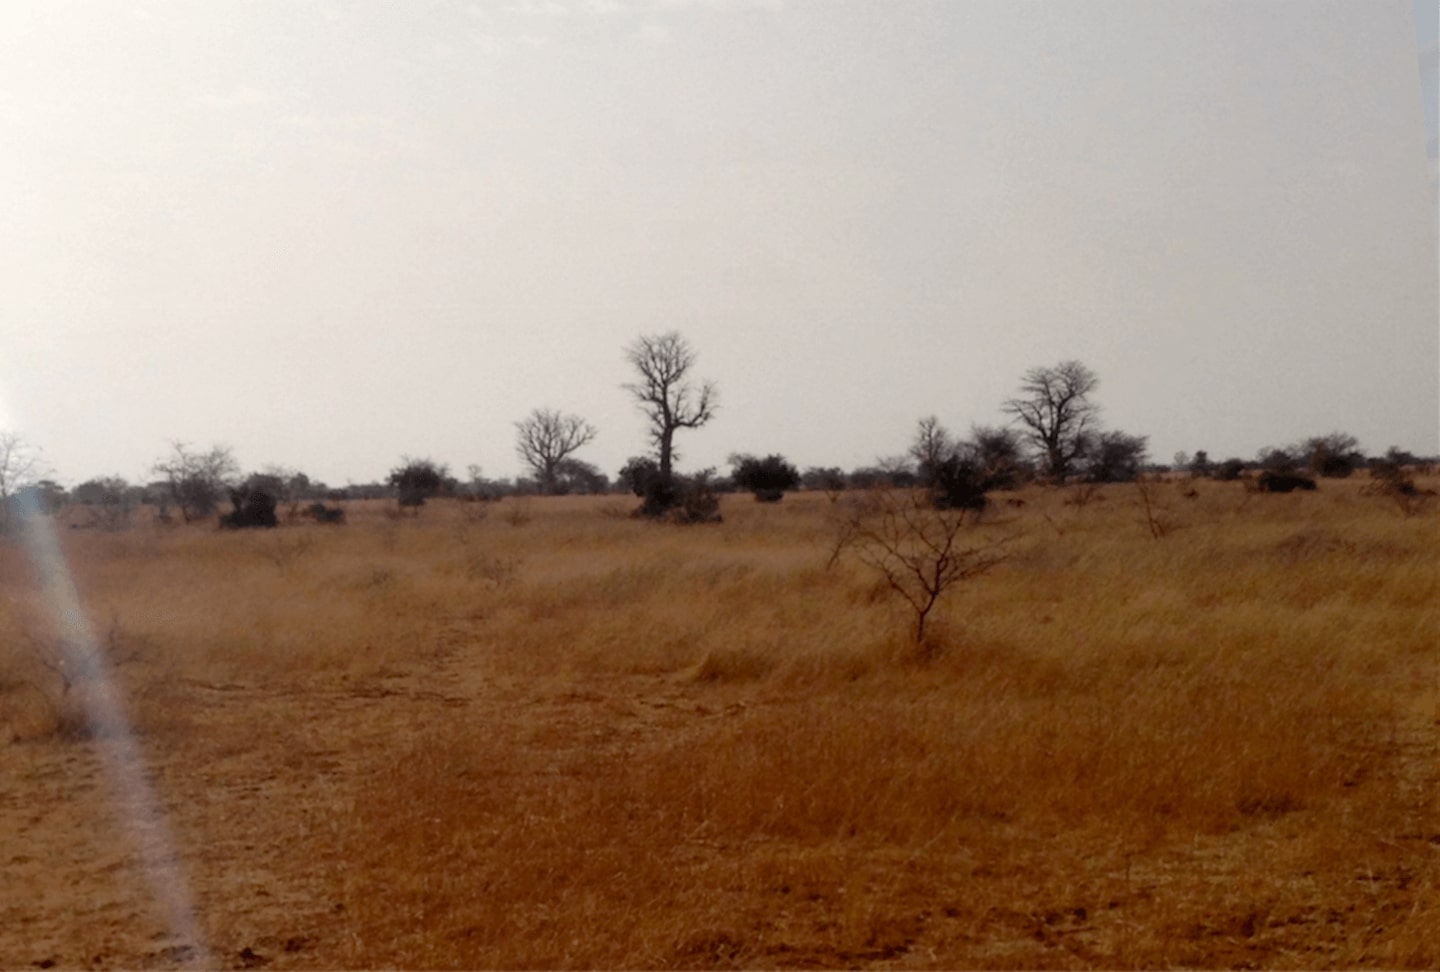 Landscape with rainfall and without - Senegal 2